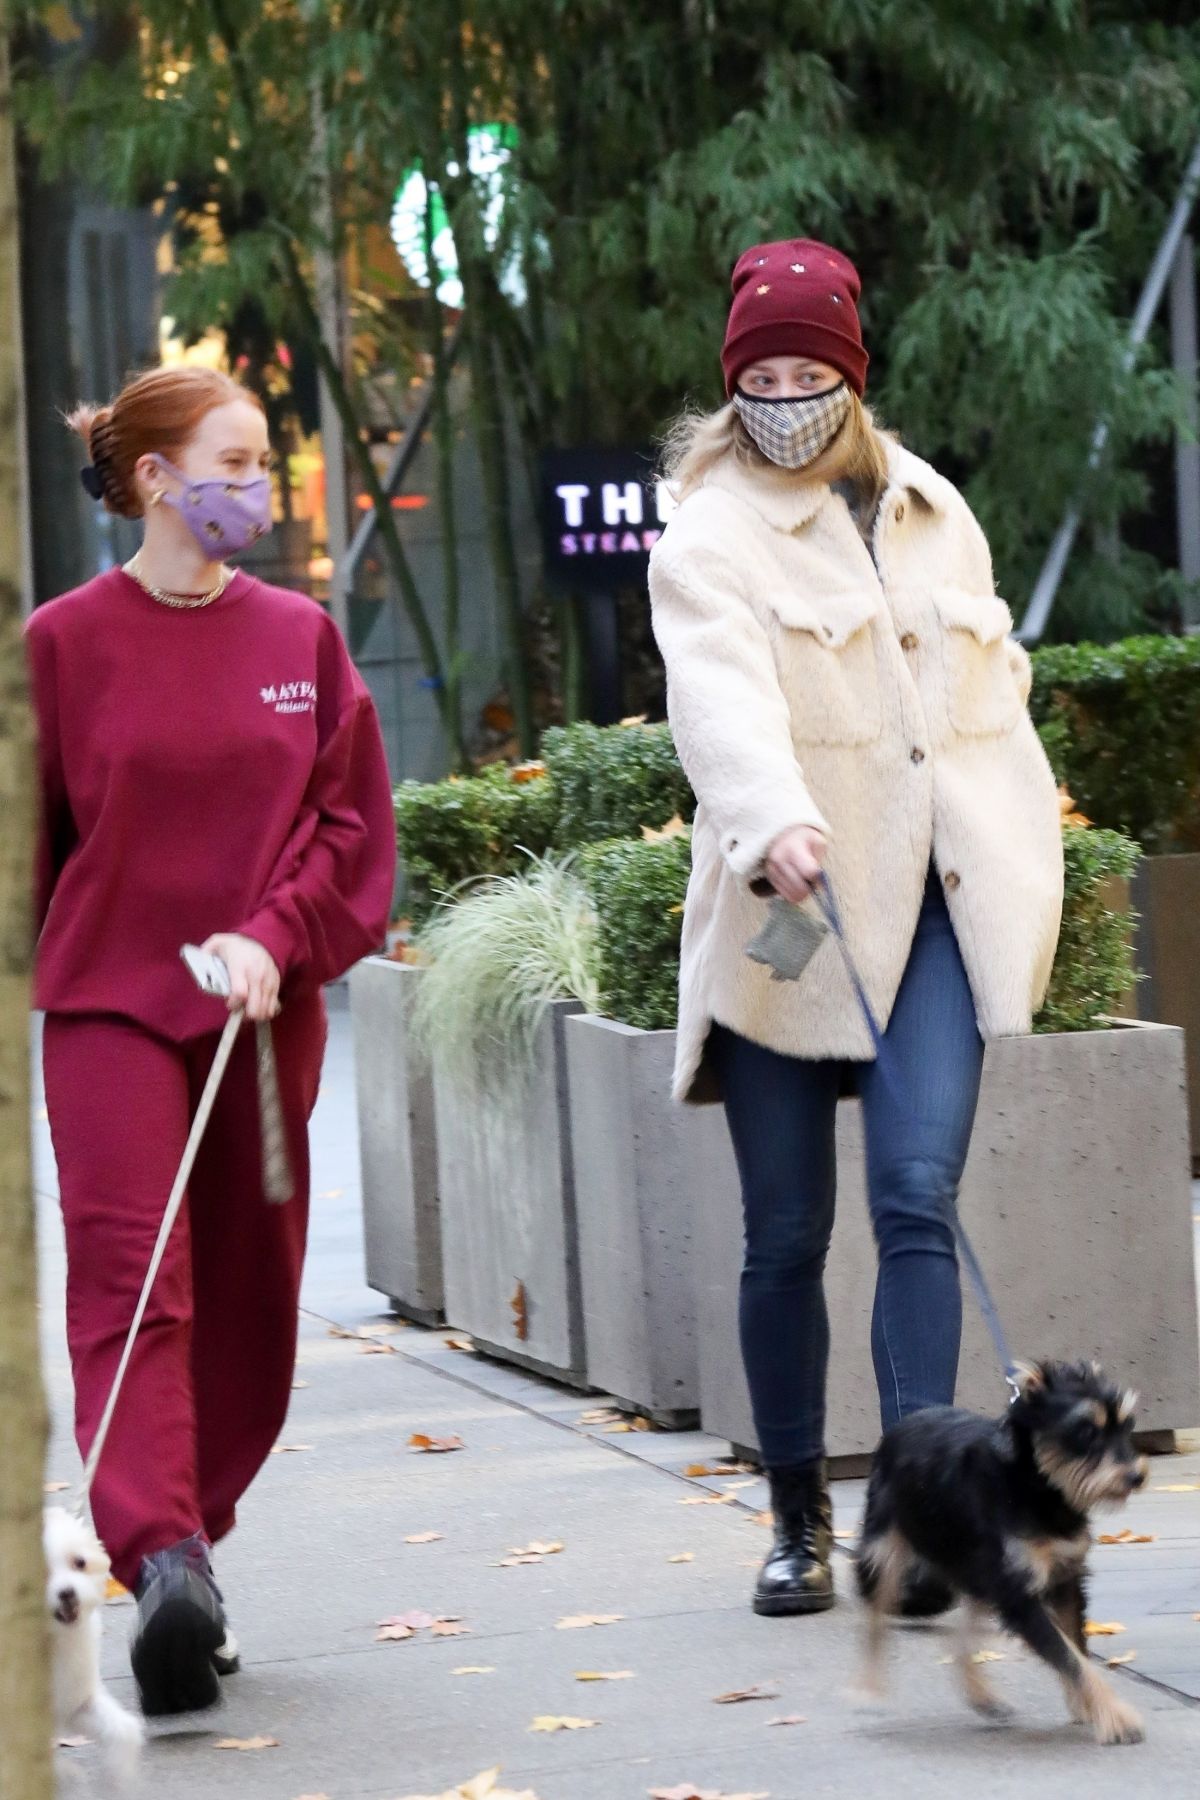 lili-reinhart-and-madelaine-petsch-out-with-their-dogs-in-vancouver-11-29-2020-2.jpg